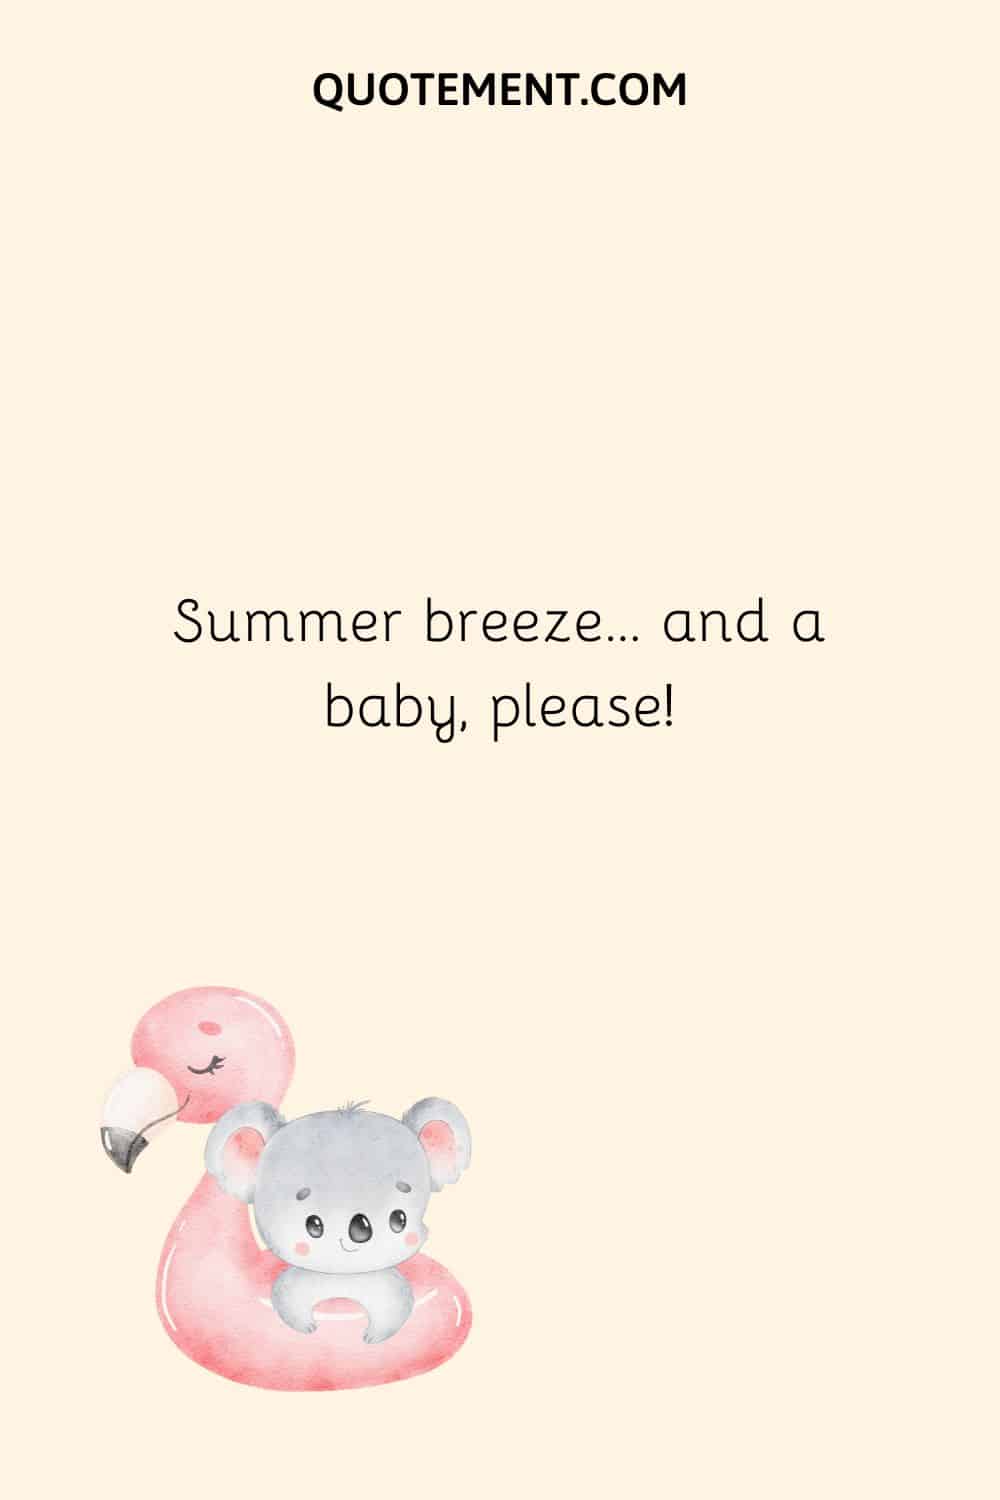 Summer breeze… and a baby, please